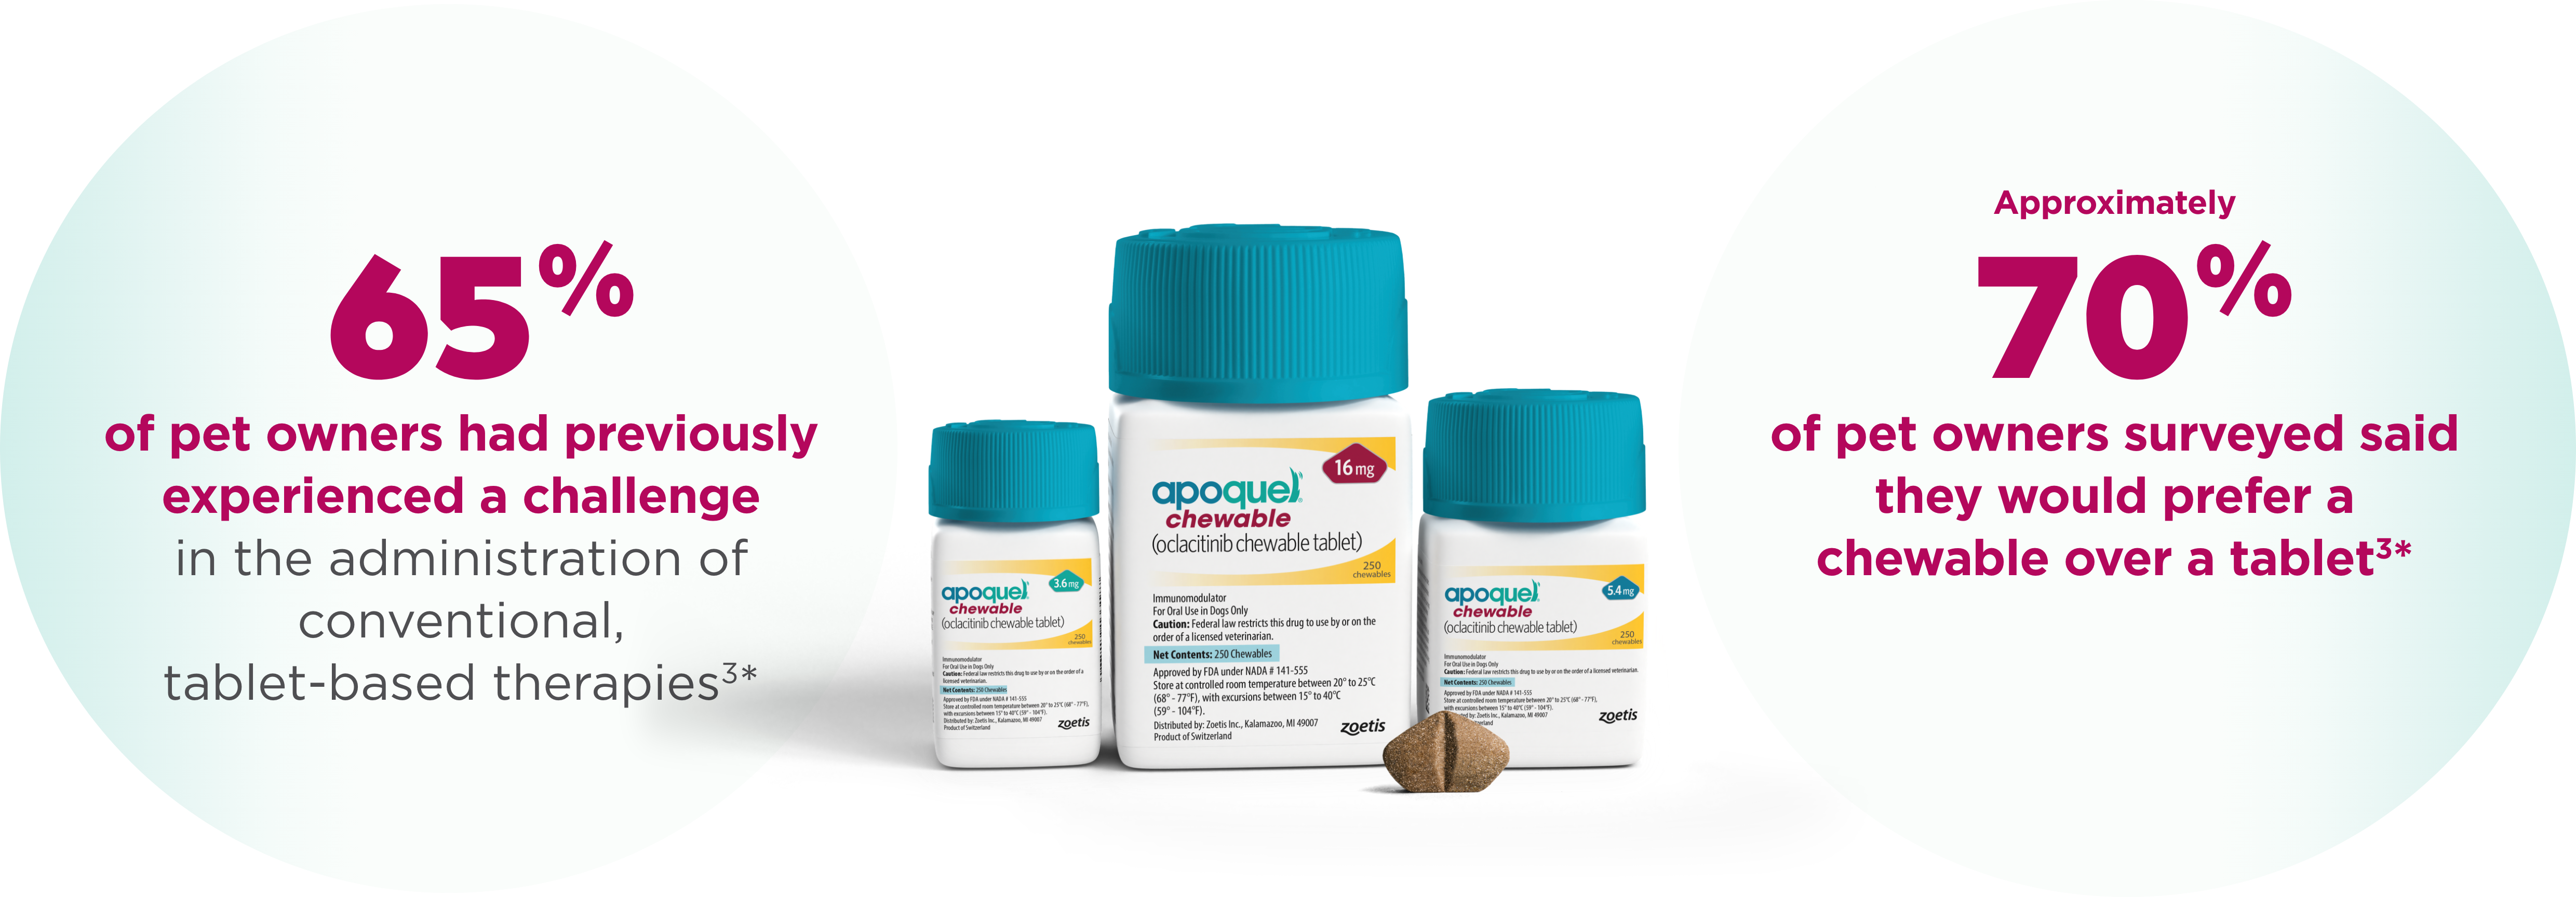 Apoquel for Dogs: Uses, Side Effects, Dosage, and Precautions You Need to  Know